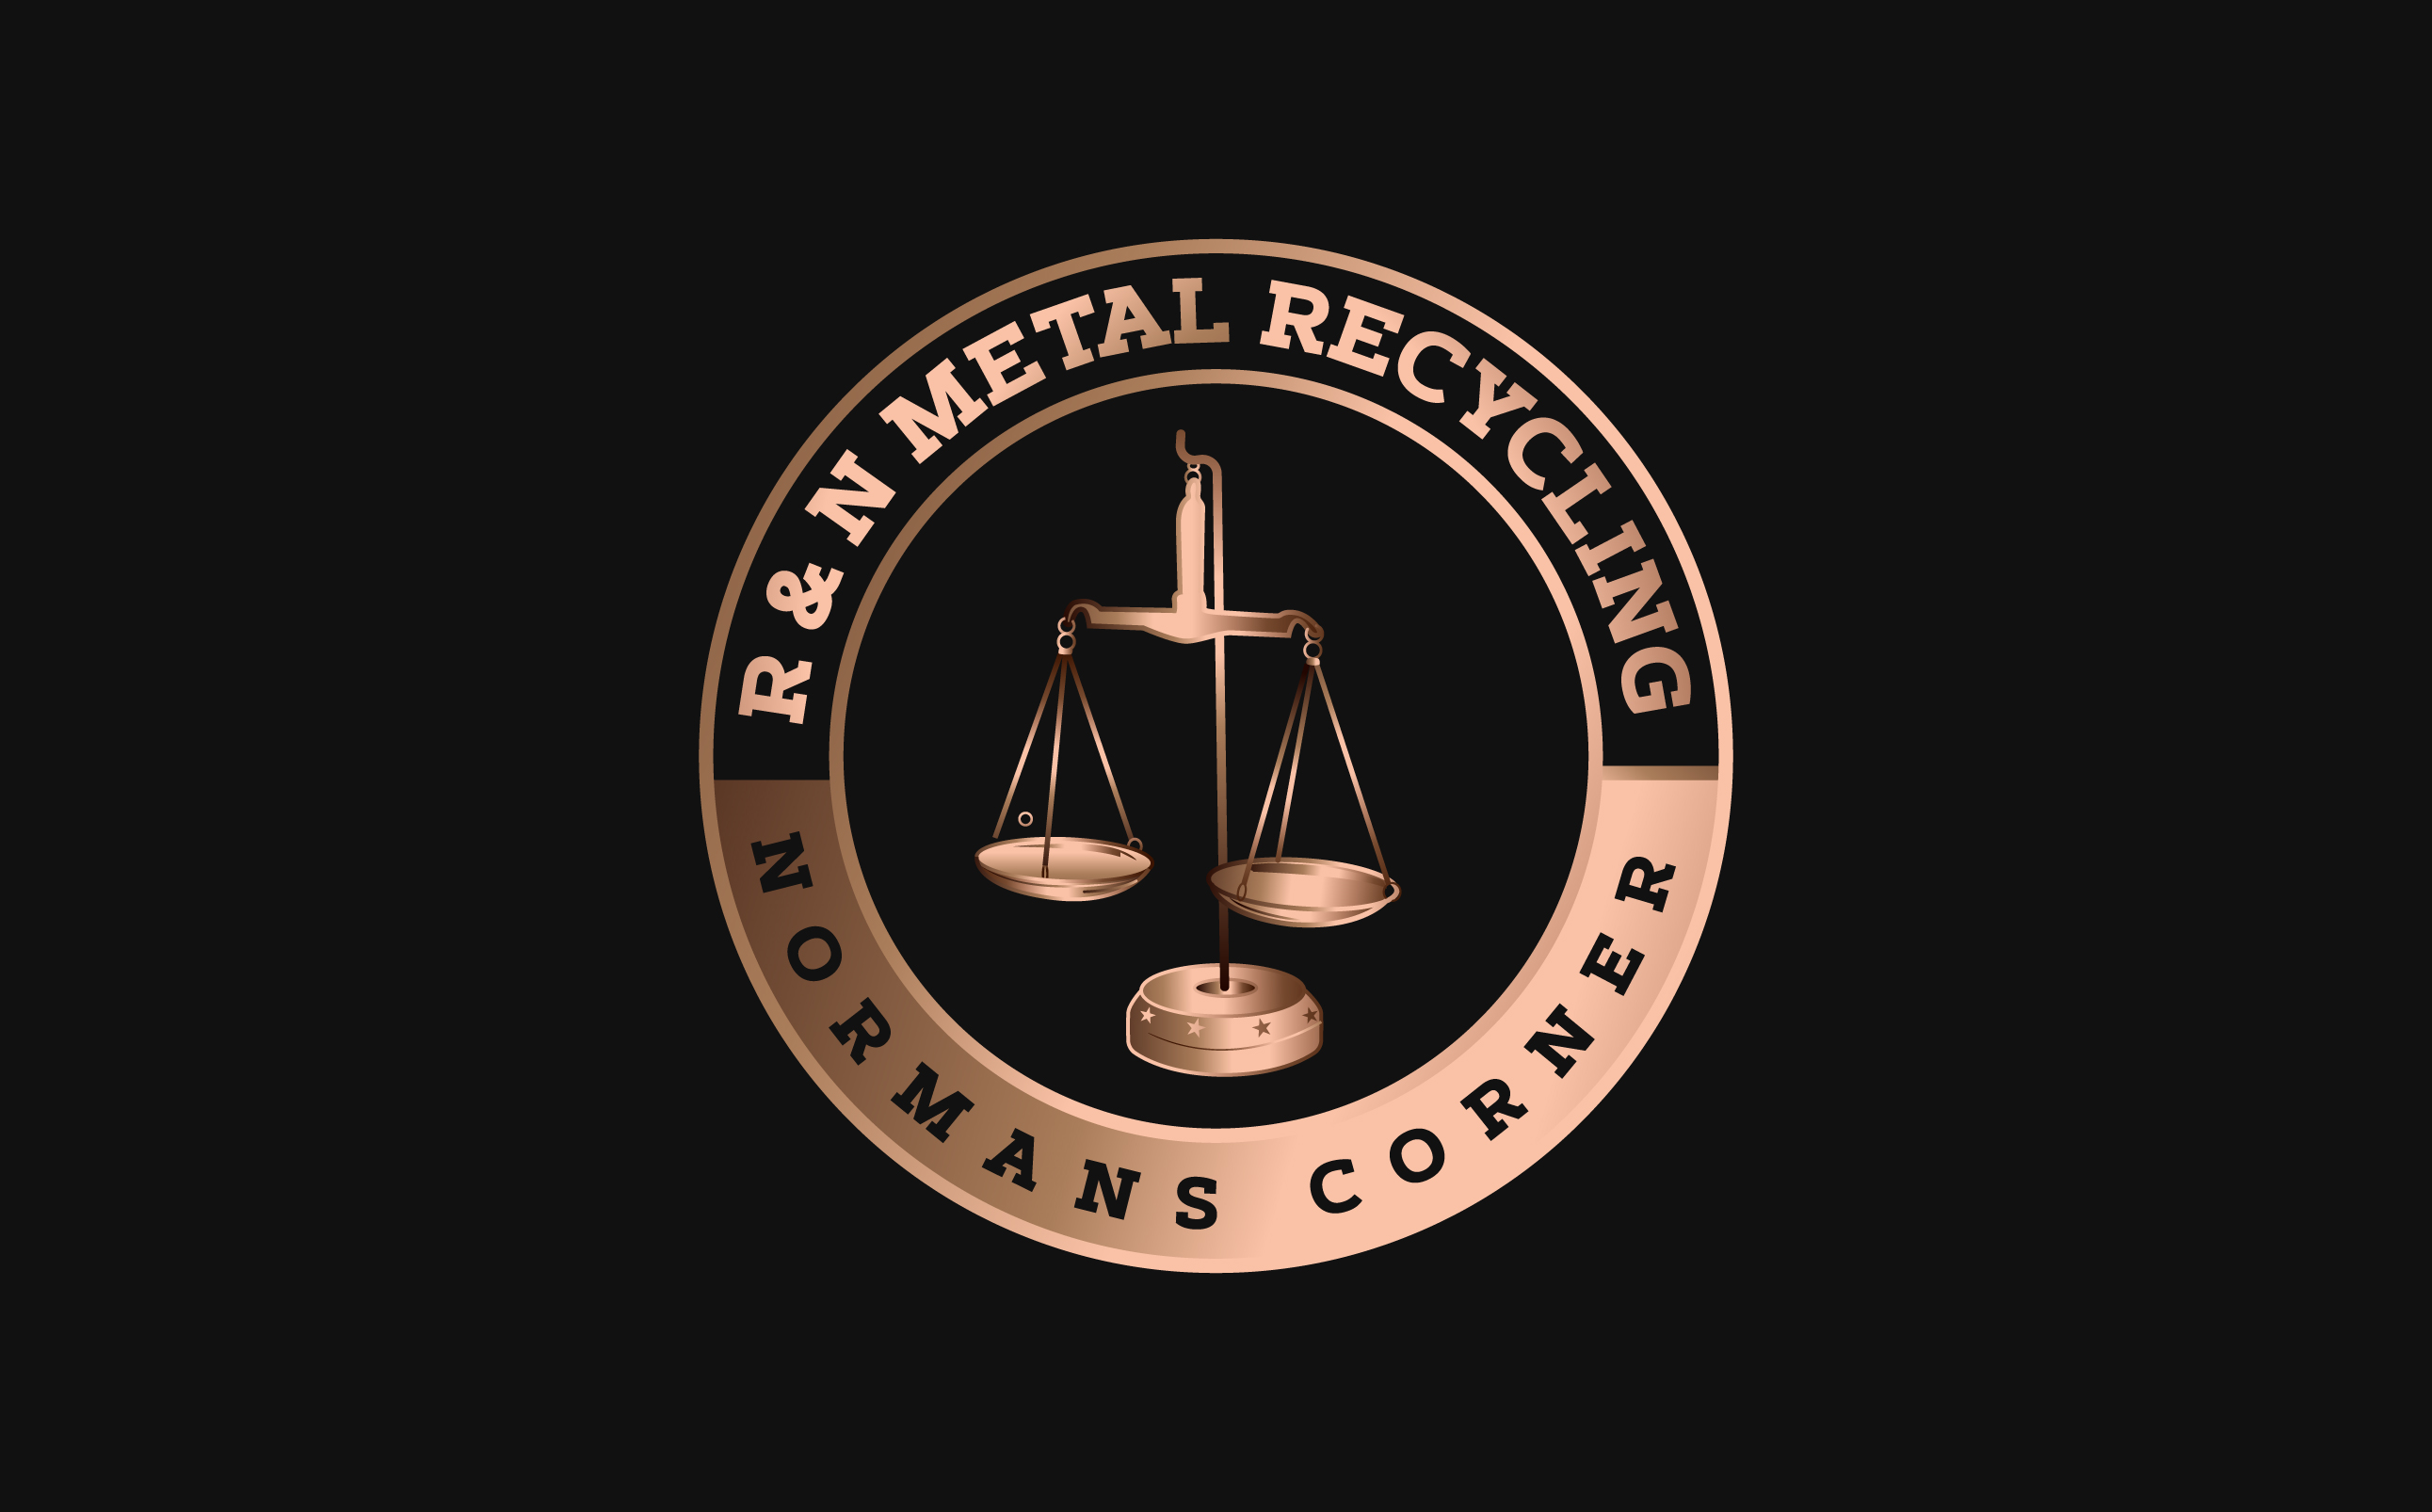 R & N Metal Recycling Limited